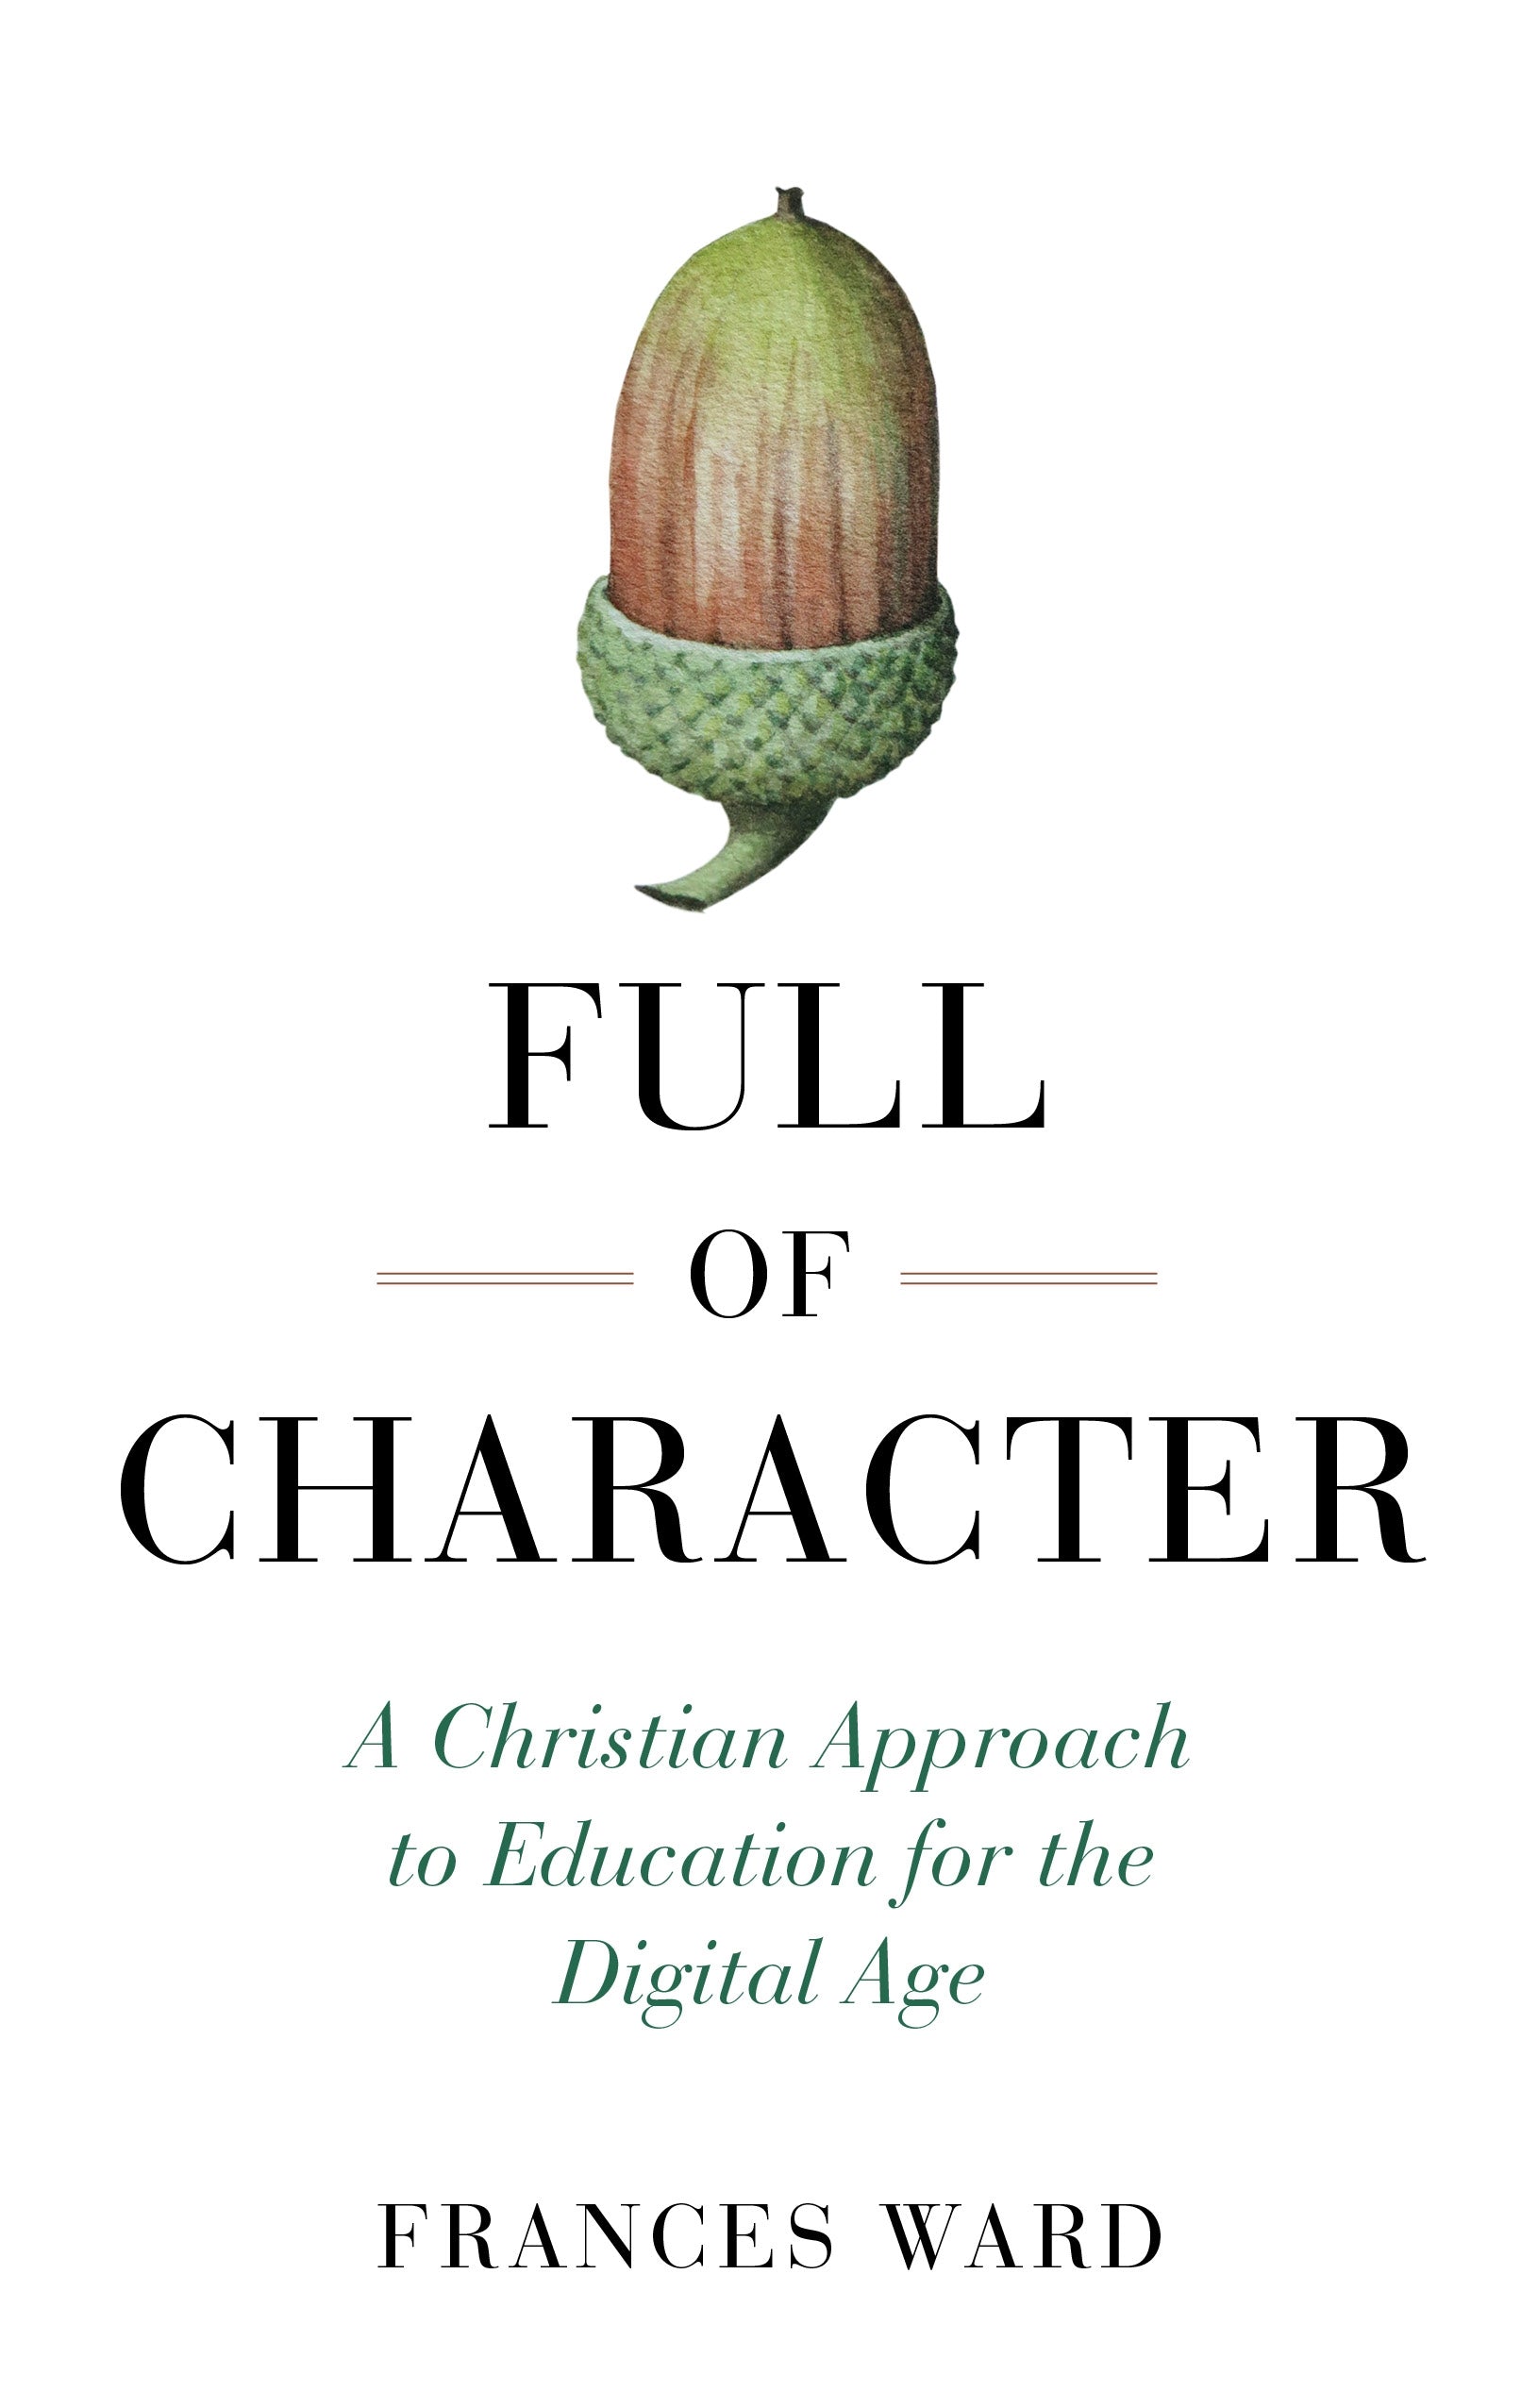 Full of Character by Frances Ward